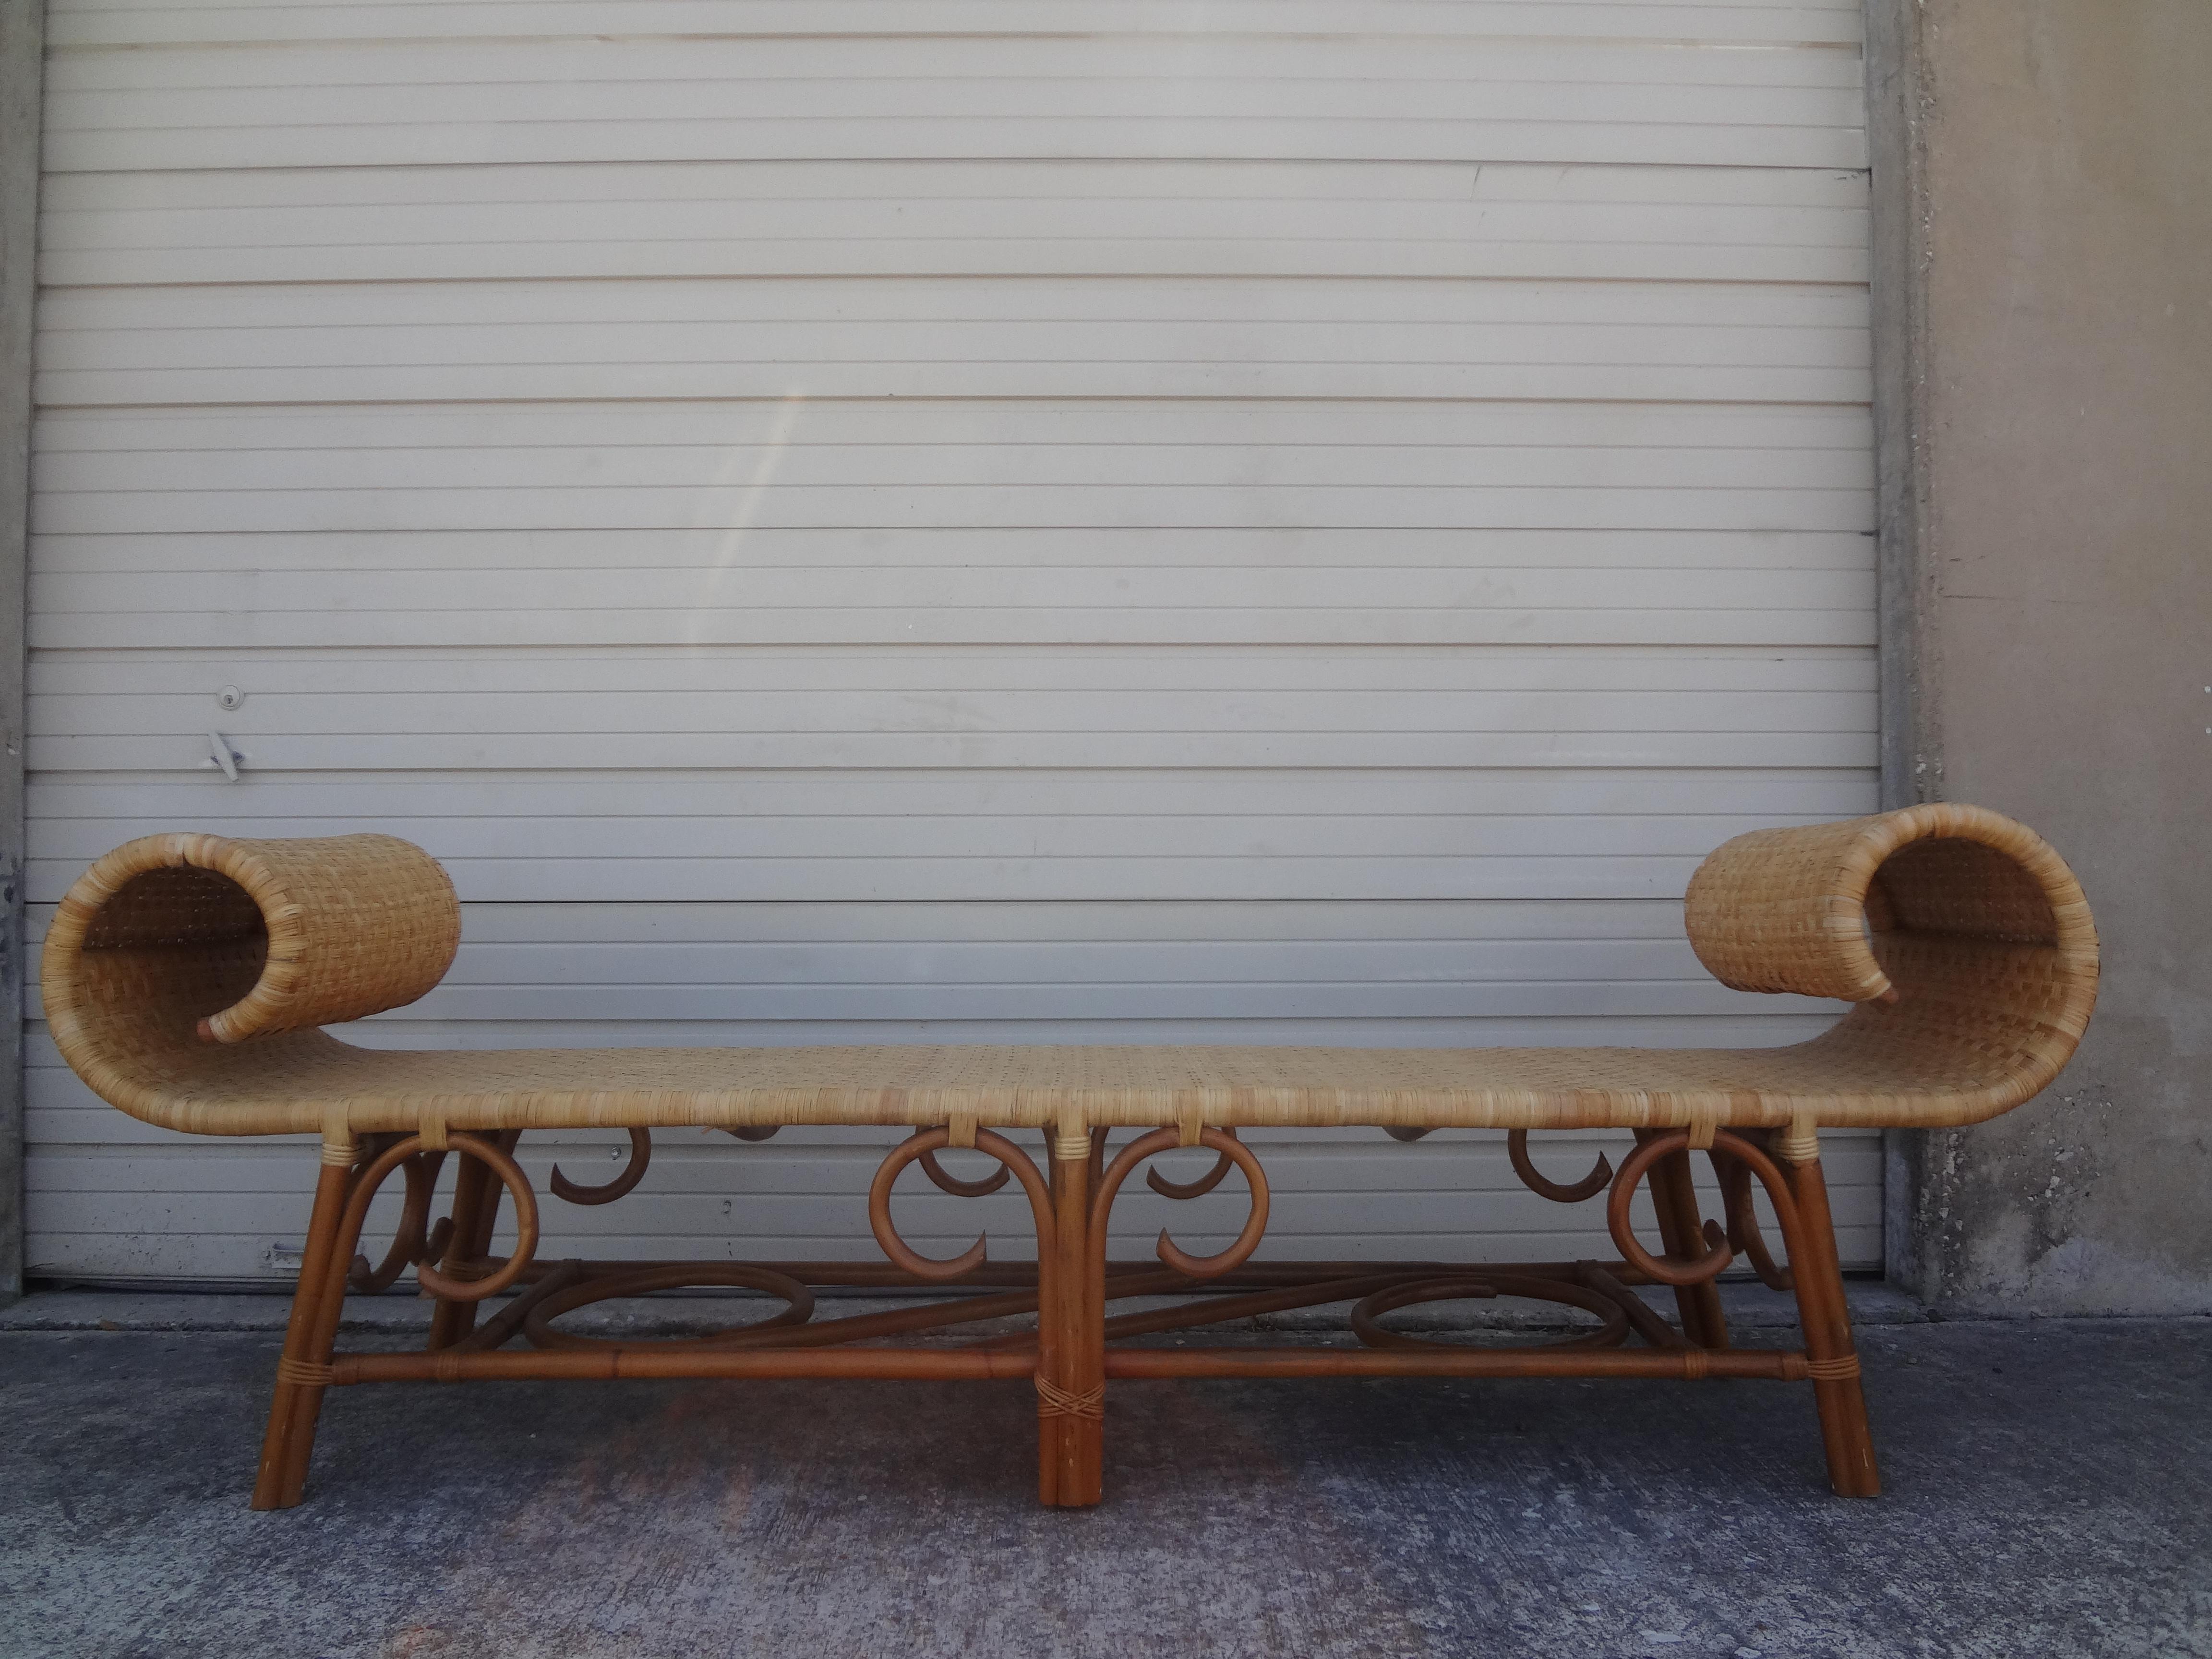 Large midcentury Anglo-Indian style rattan daybed or bench. This gorgeous British Colonial style rattan bench is in excellent condition and was never used. The seat is very tight.
Great at the end of a bed, in a solarium, garden room, morning room